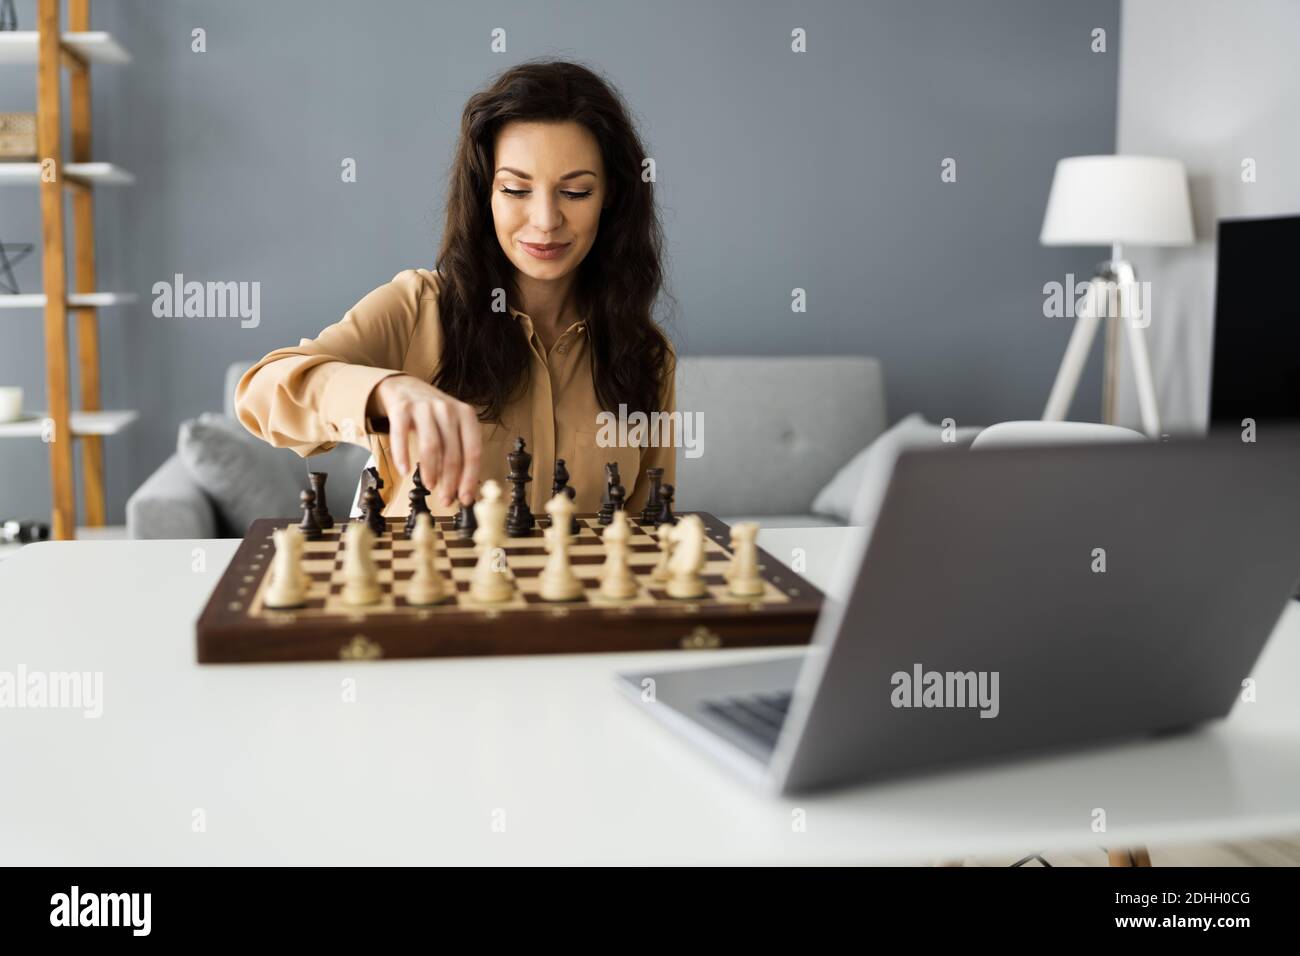 Woman Playing Chess Online Using Video Conference Call Stock Photo